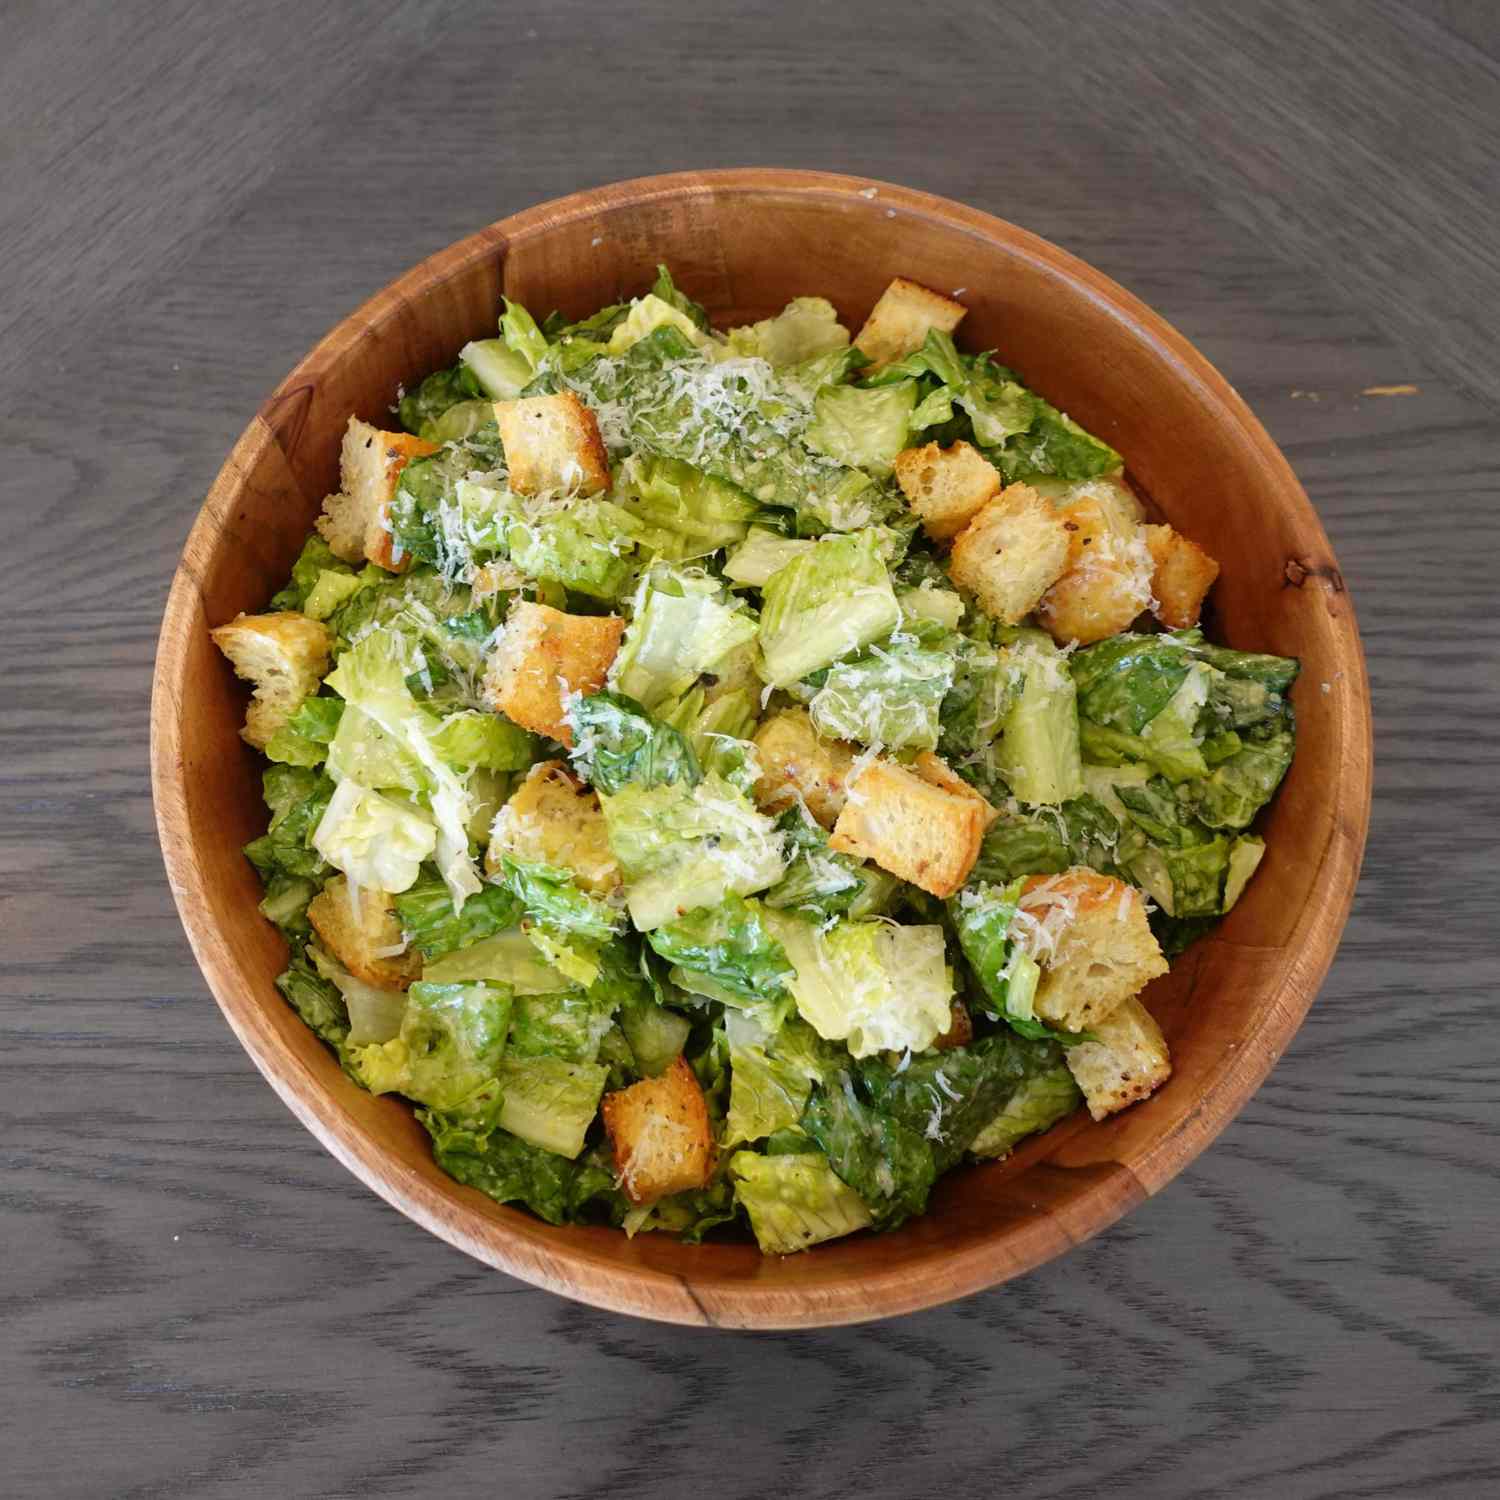 How to Make Caesar Salad From Scratch